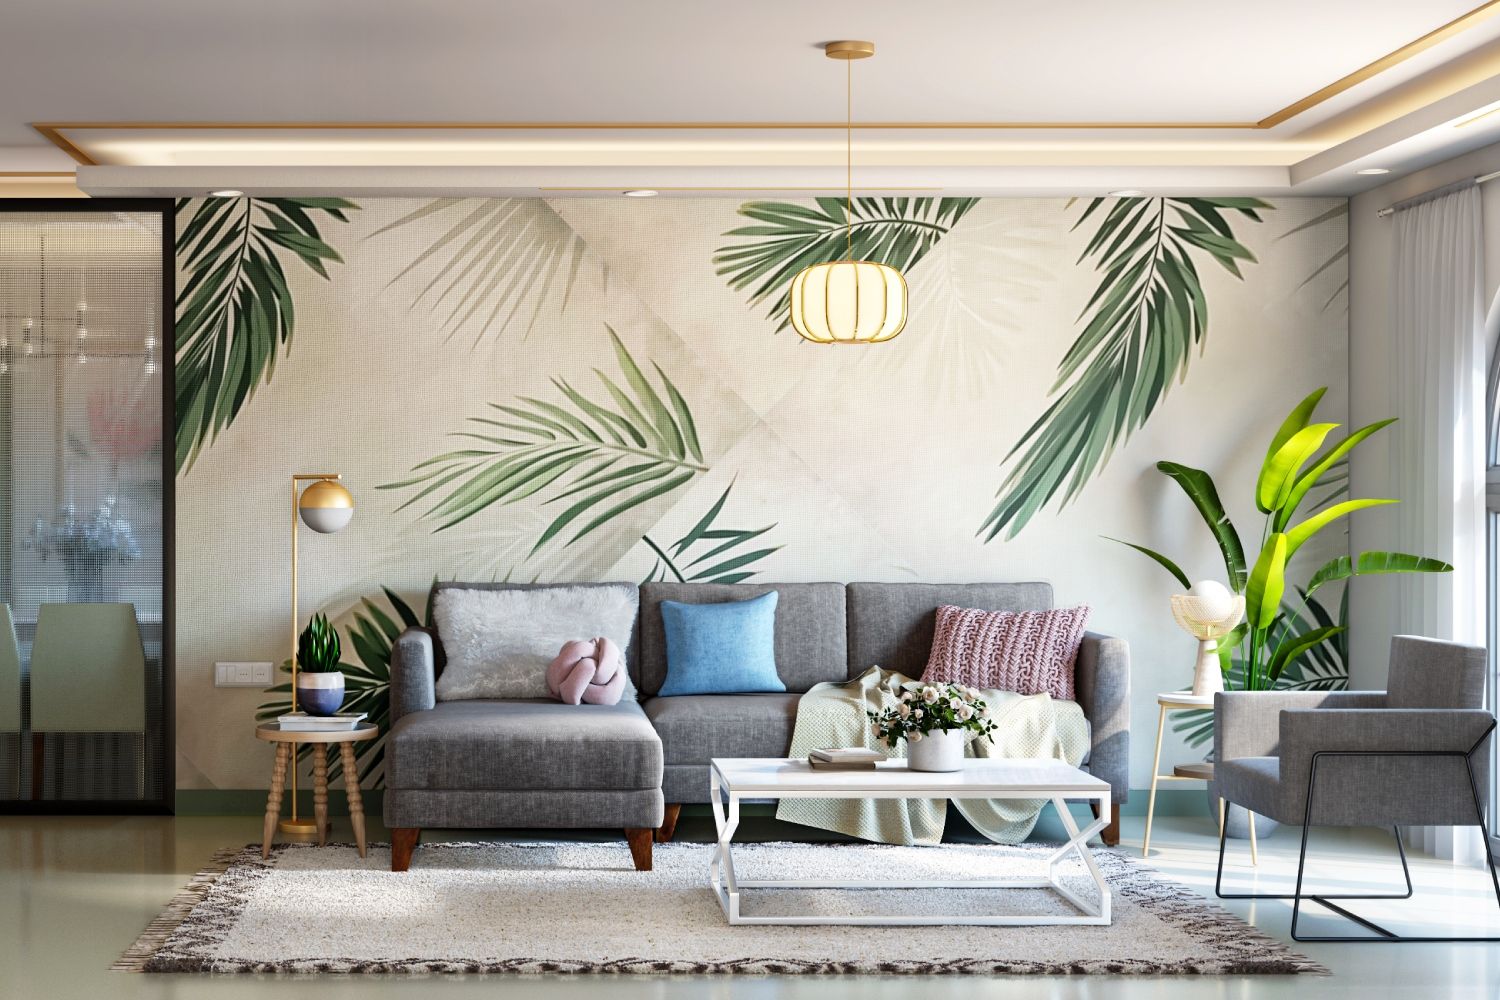 Tropical Living Room Design With Beige And Green Leafy Wallpaper